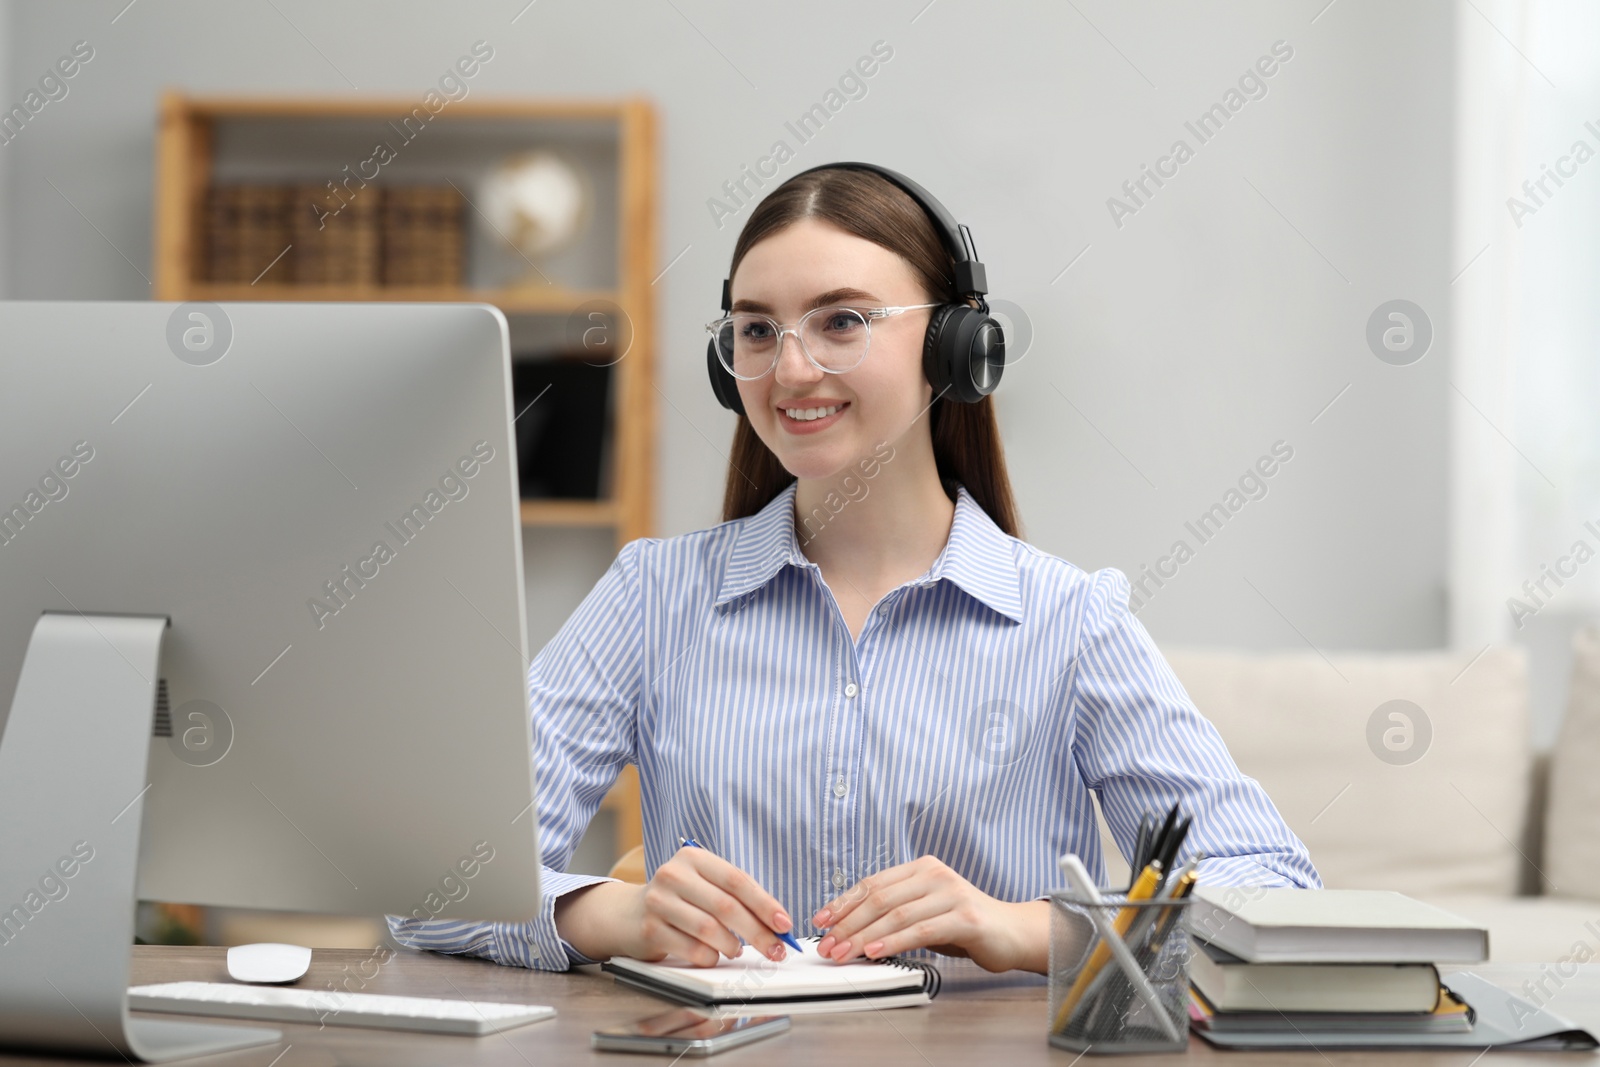 Photo of E-learning. Young woman taking notes during online lesson at table indoors